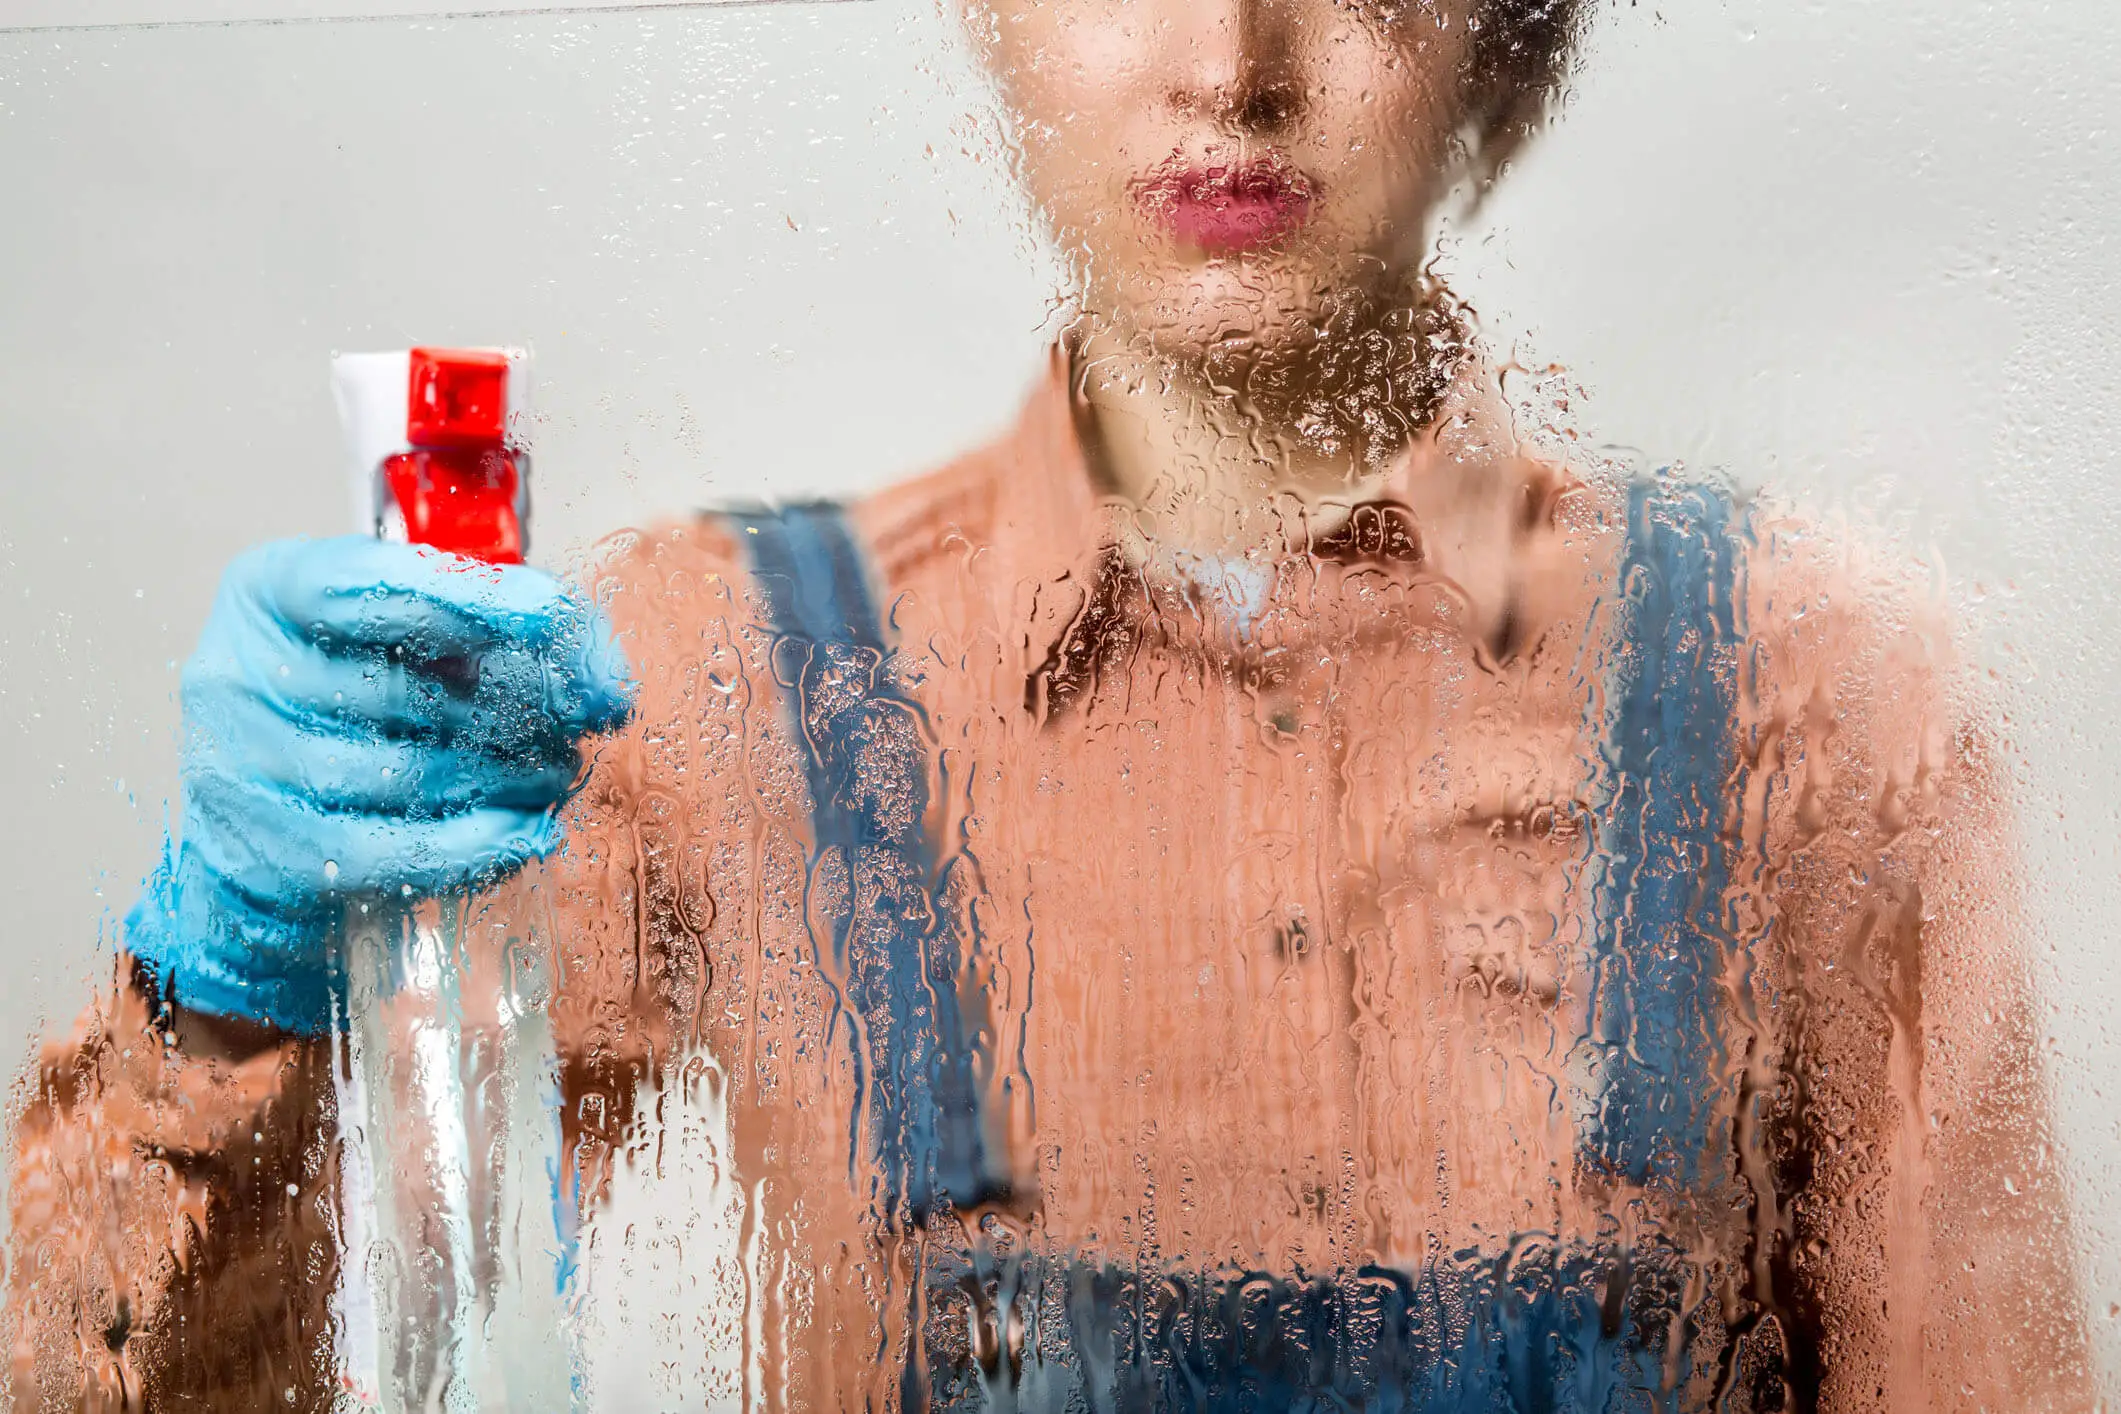 How To Clean Plexiglass Using Best Ways: 5 Frequently Asked Questions Answered